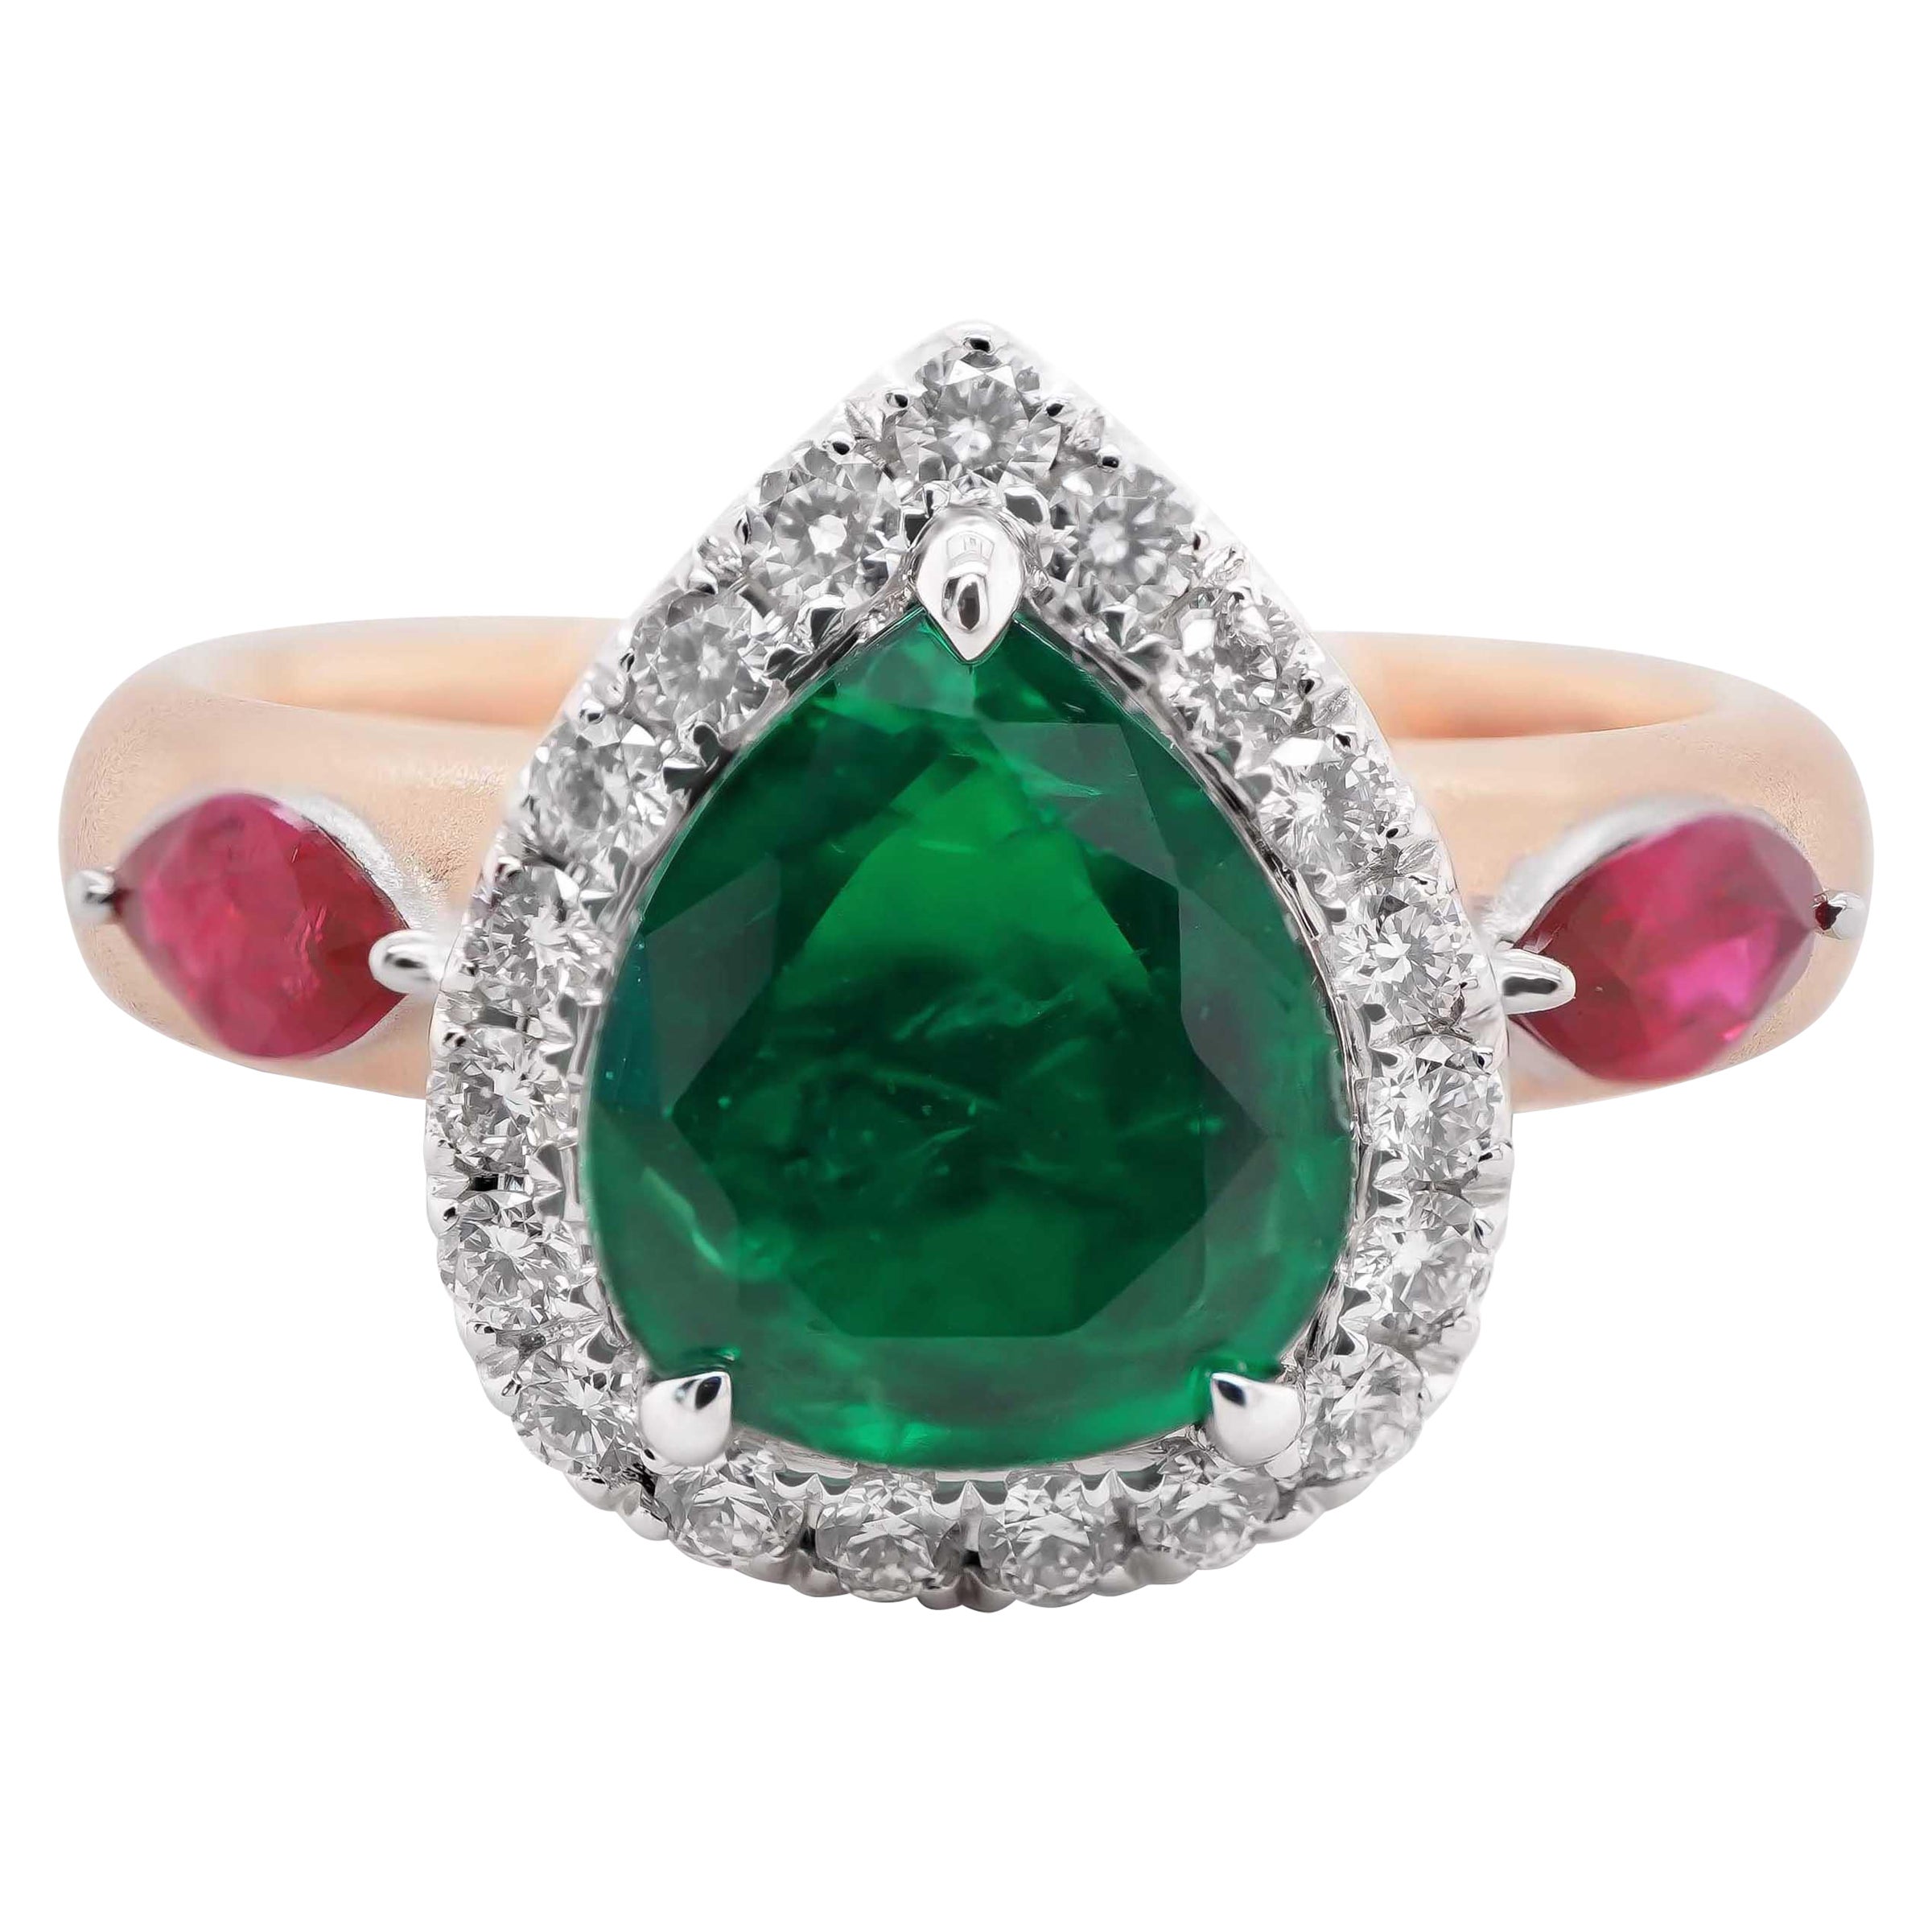 1.05 Carat Vivid Green Emerald Flanked by Ruby Marquise Matt Finish 18K Gold